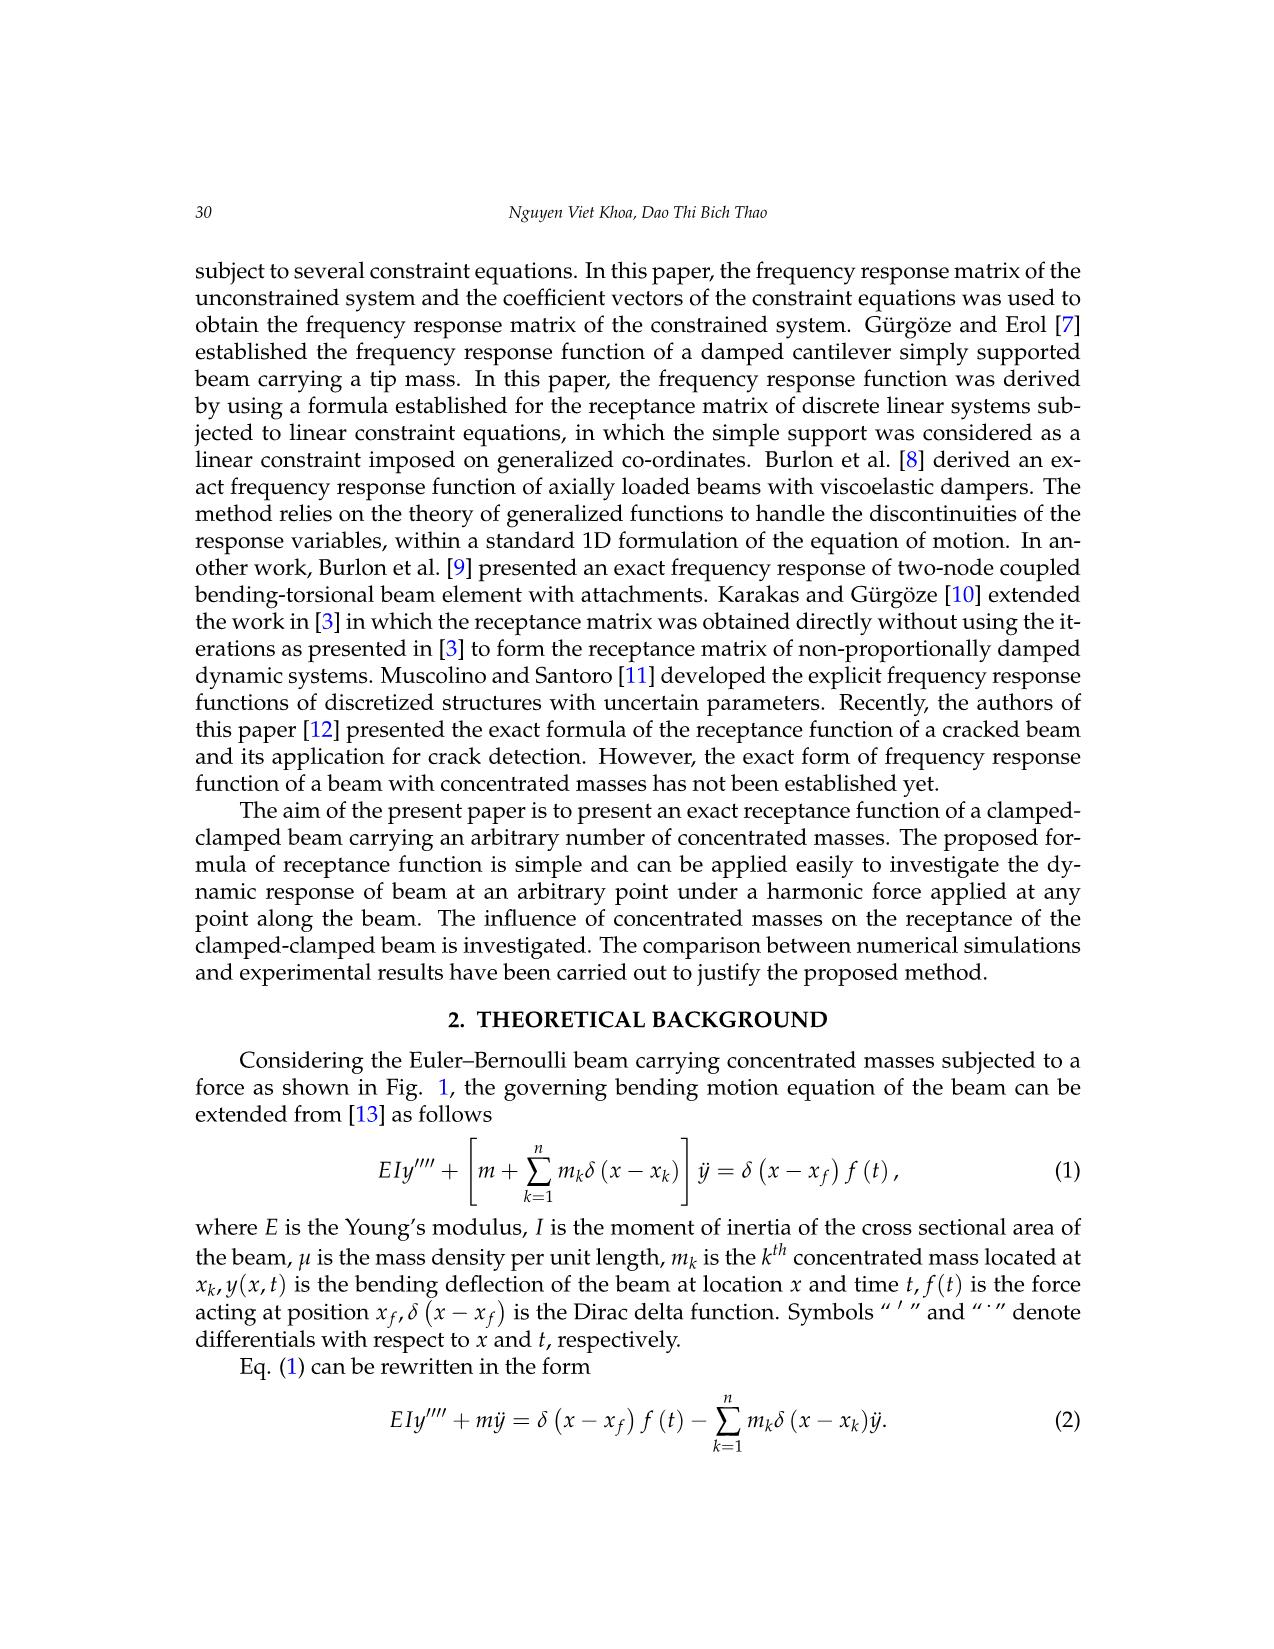 Theoretical and experimental analysis of the exact receptance function of a clamped - Clamped beam with concentrated masses trang 2